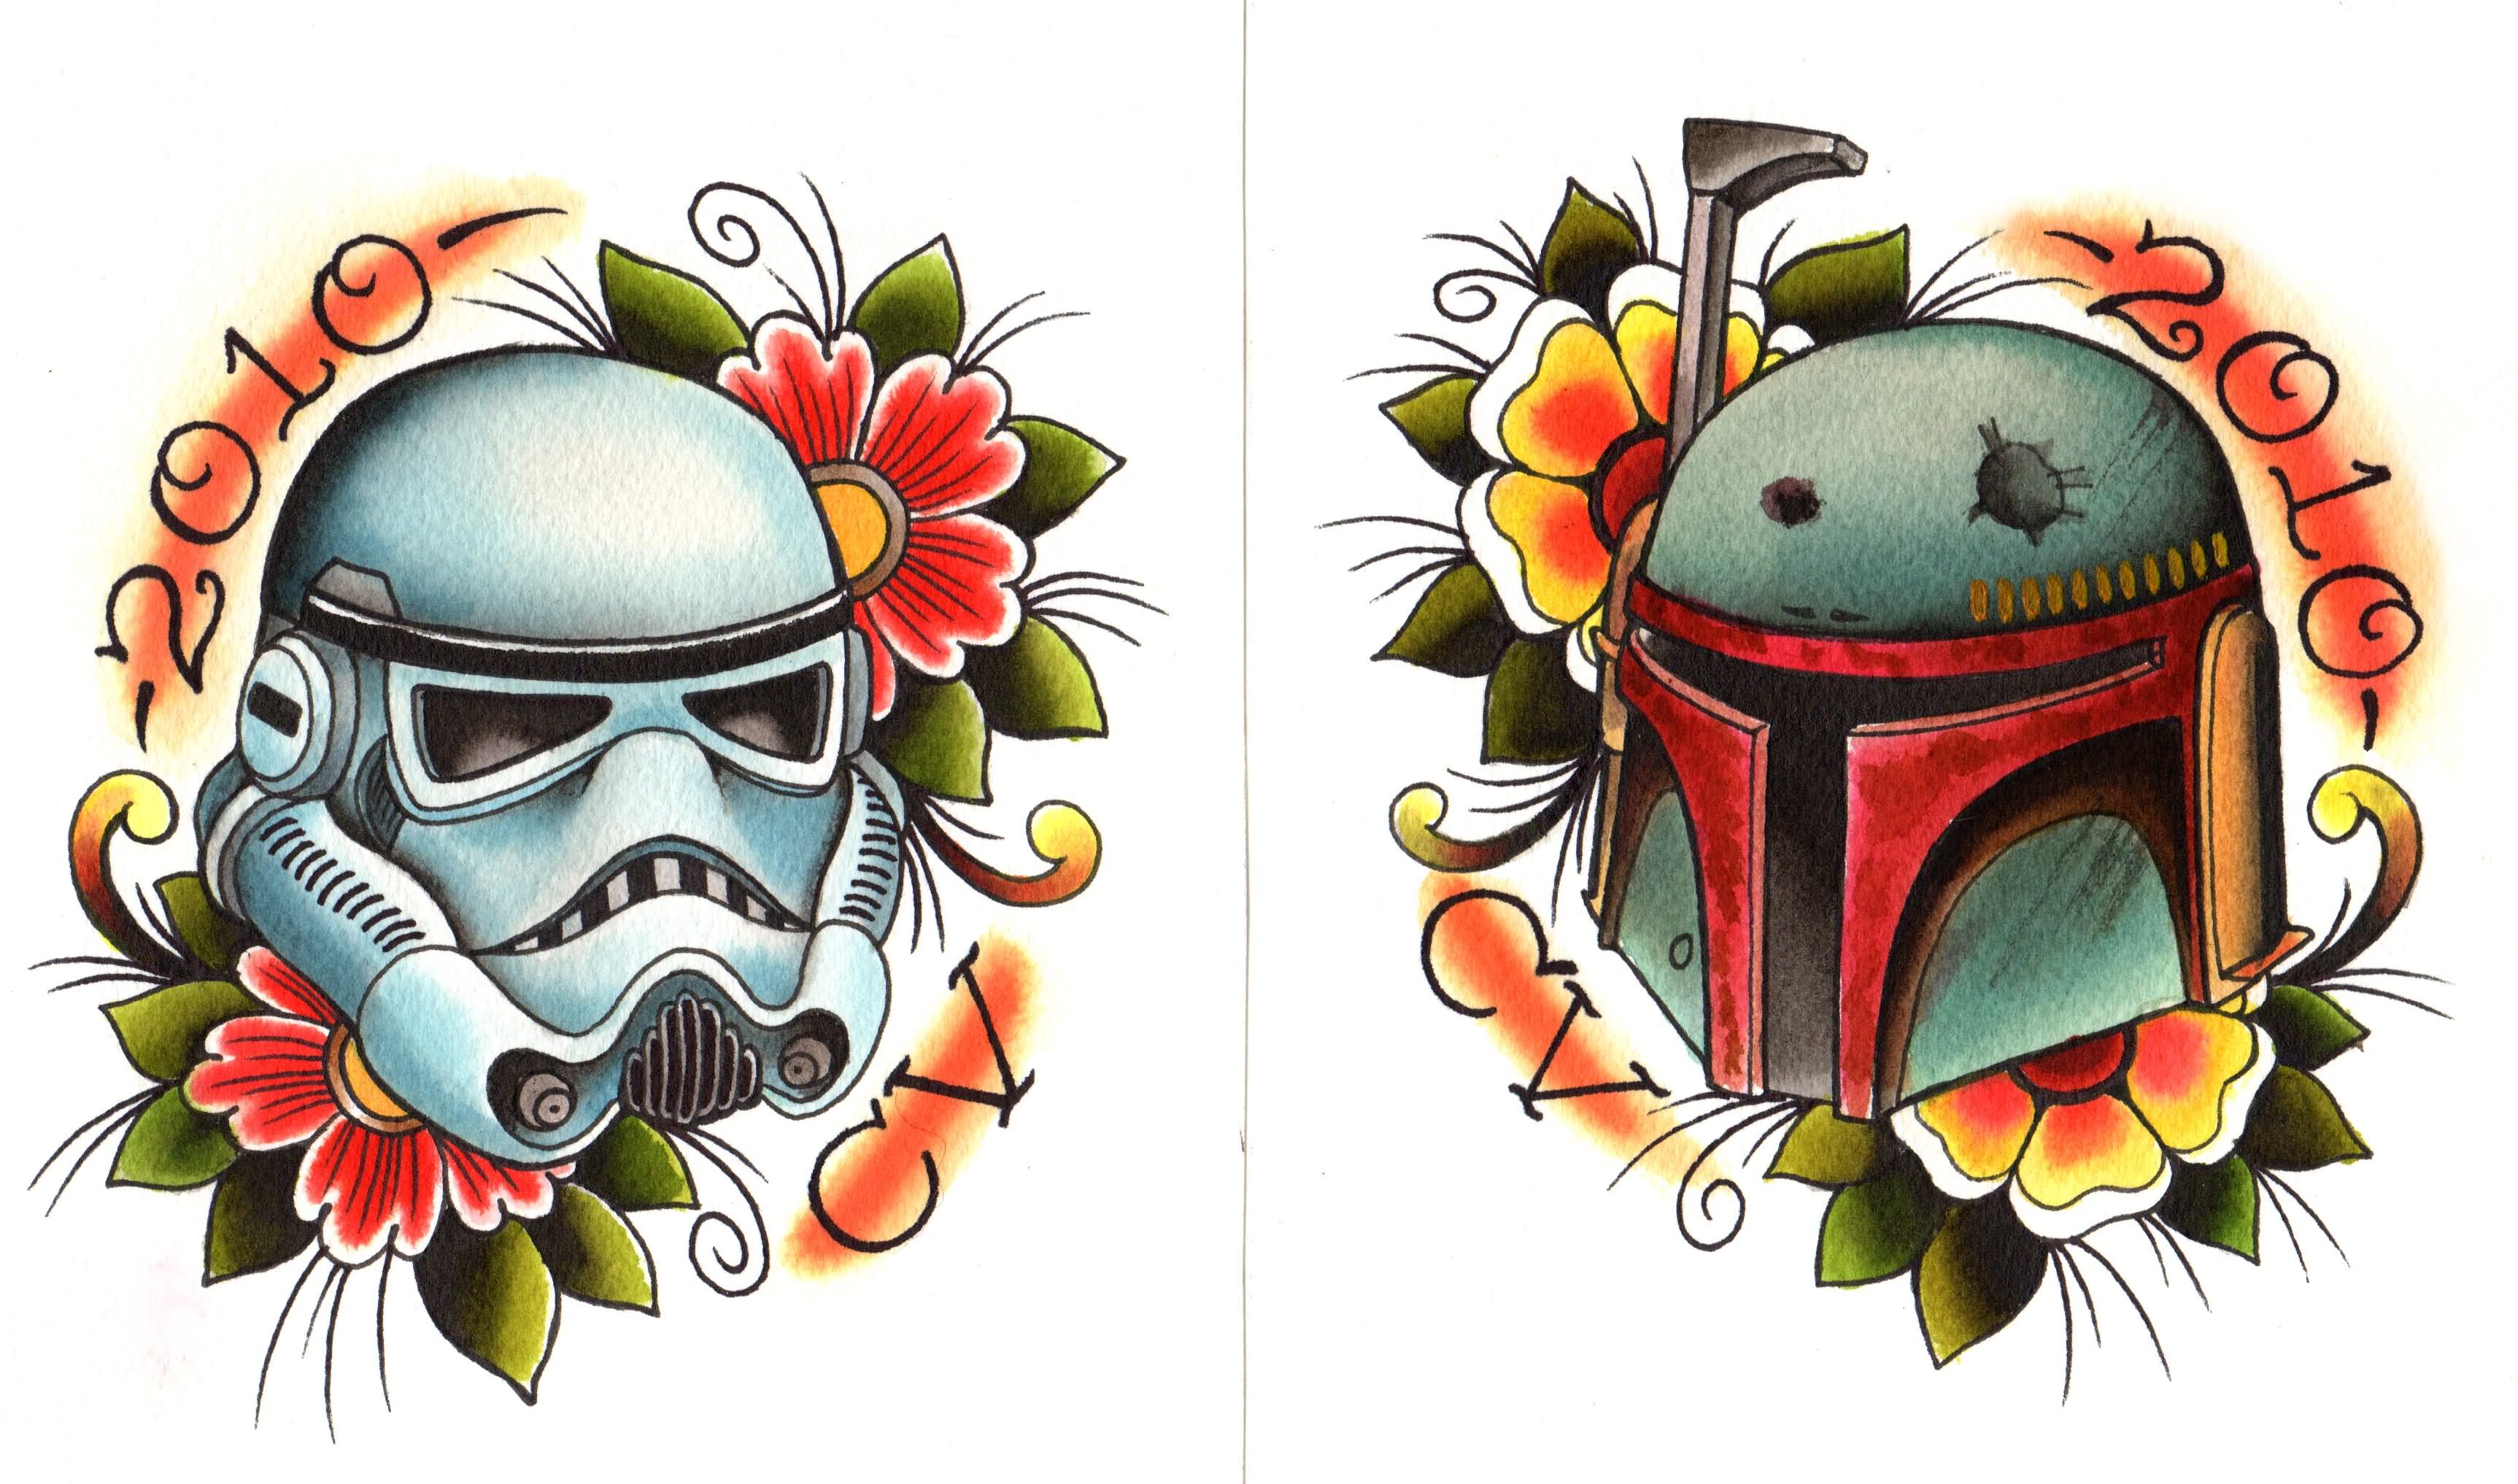 Star War Stormtrooper And Boba Fett Mask With Flowers Tattoo Design